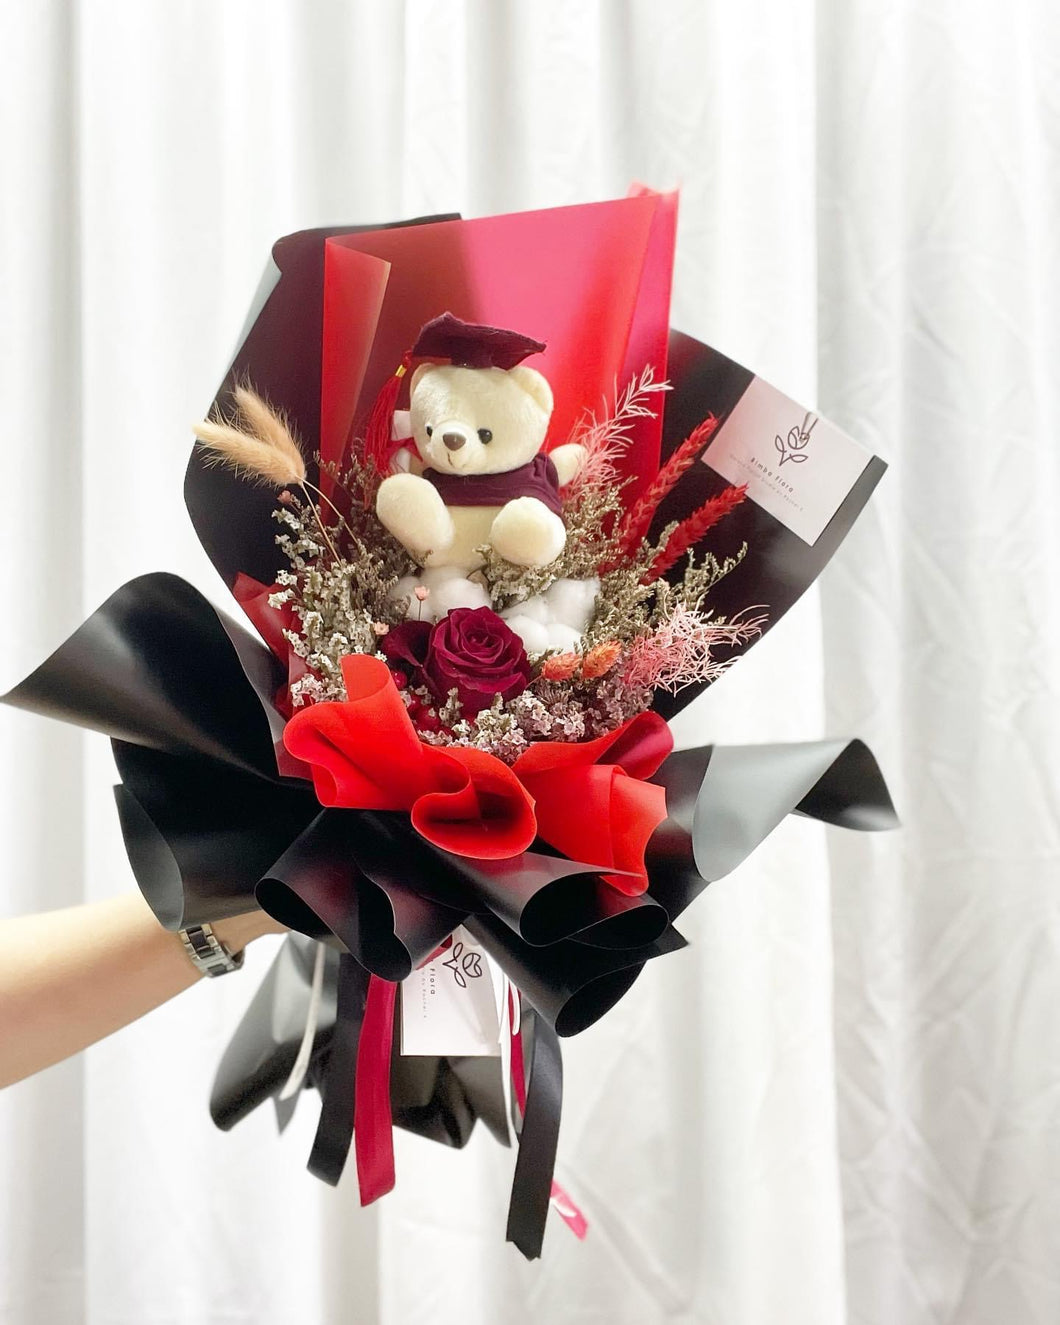 Prestige Bouquet To You ( Red Roses, Cotton Flower, Dried Flower Series & Graduation Bear